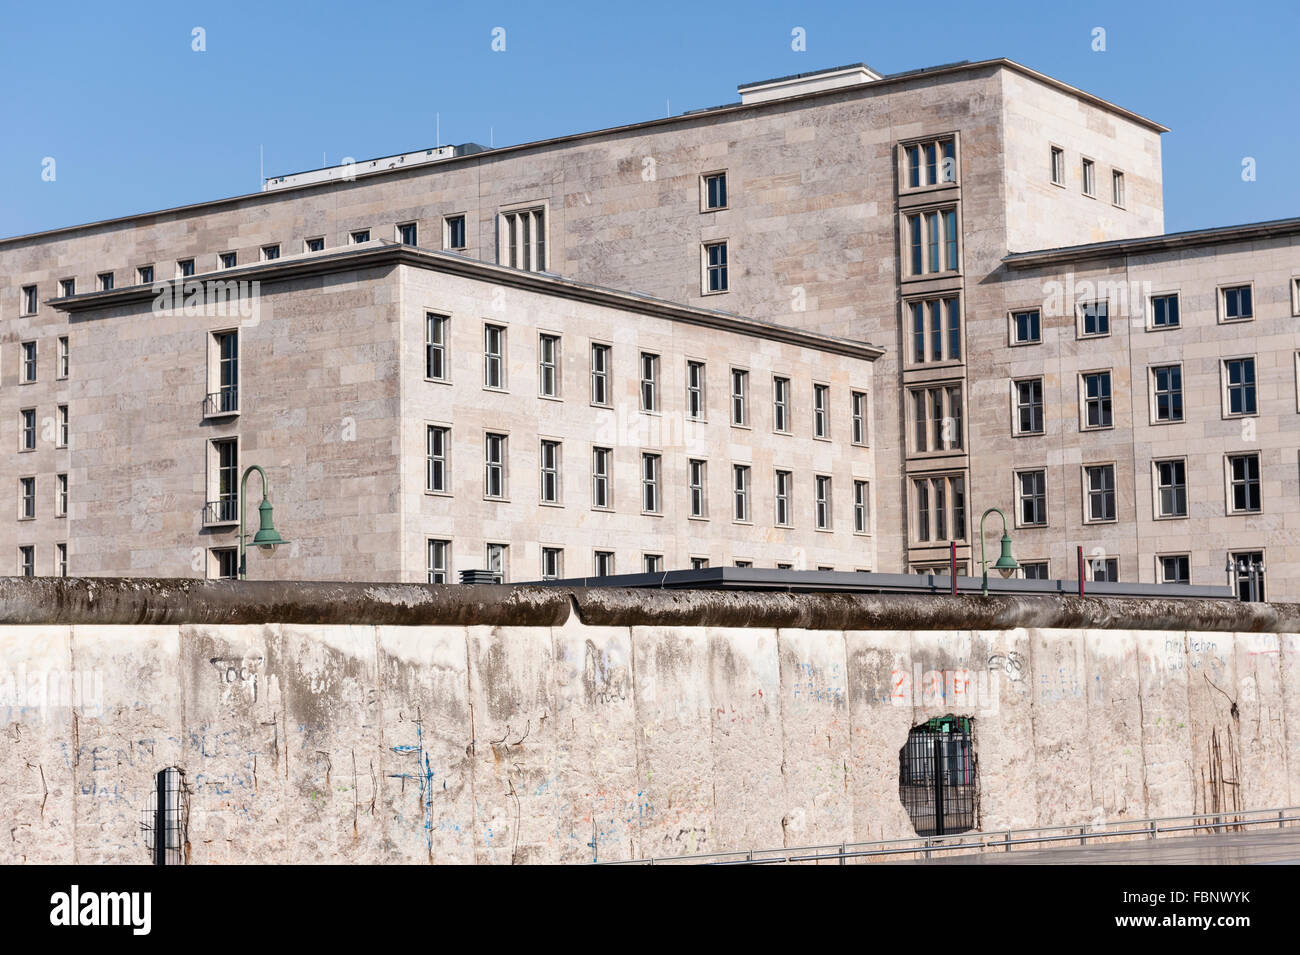 Berlin wall with eastern bloc buildings Stock Photo